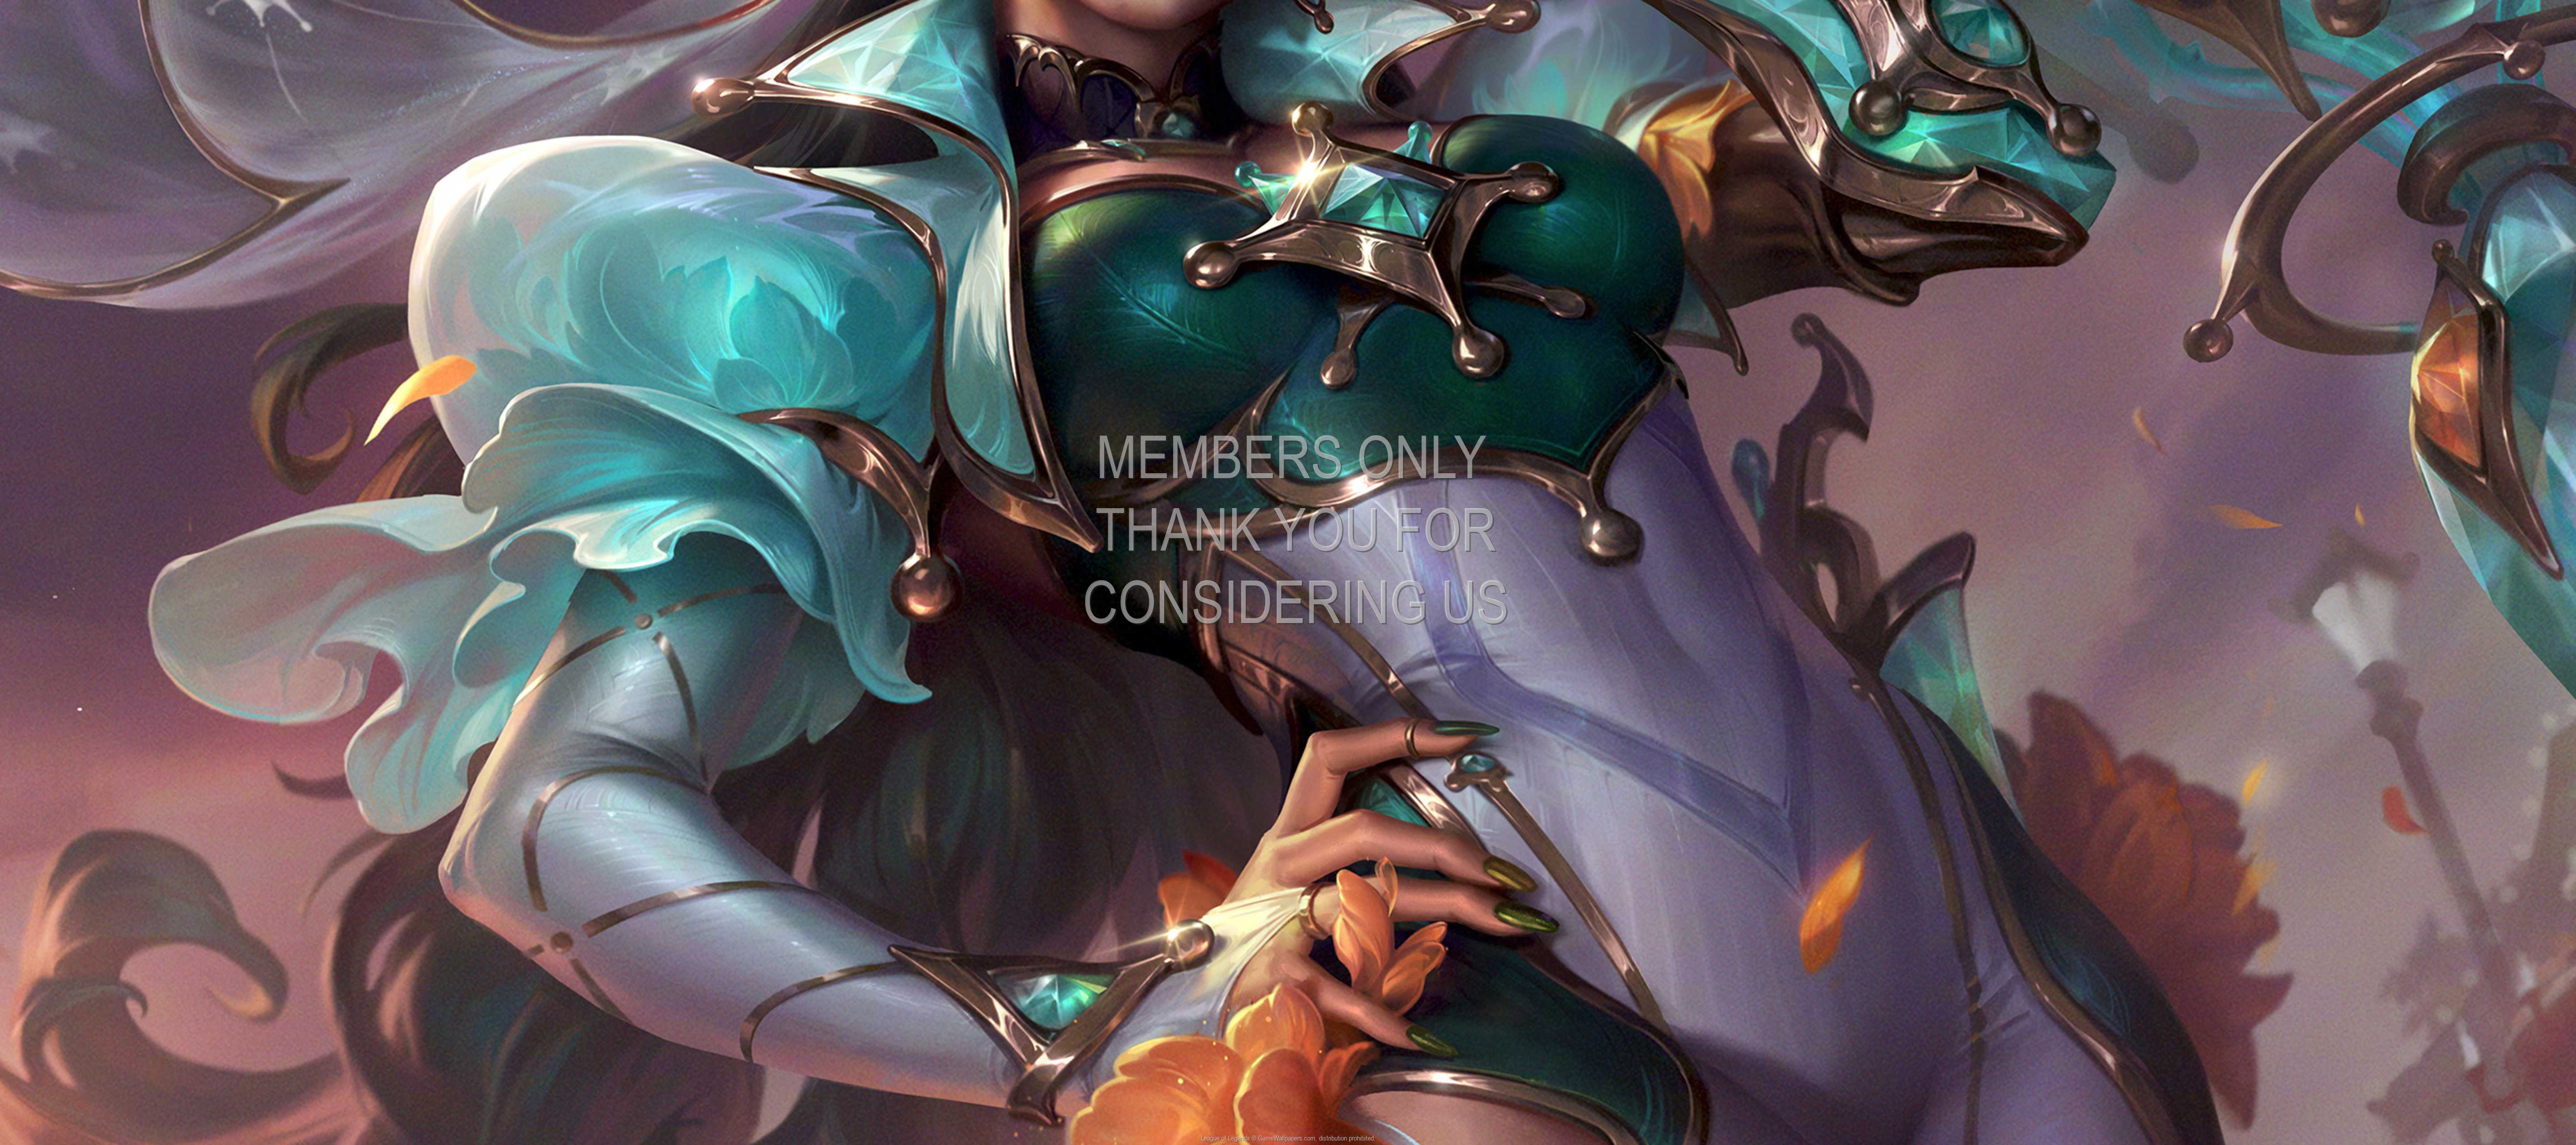 League of Legends 1440p%20Horizontal Mobile wallpaper or background 142